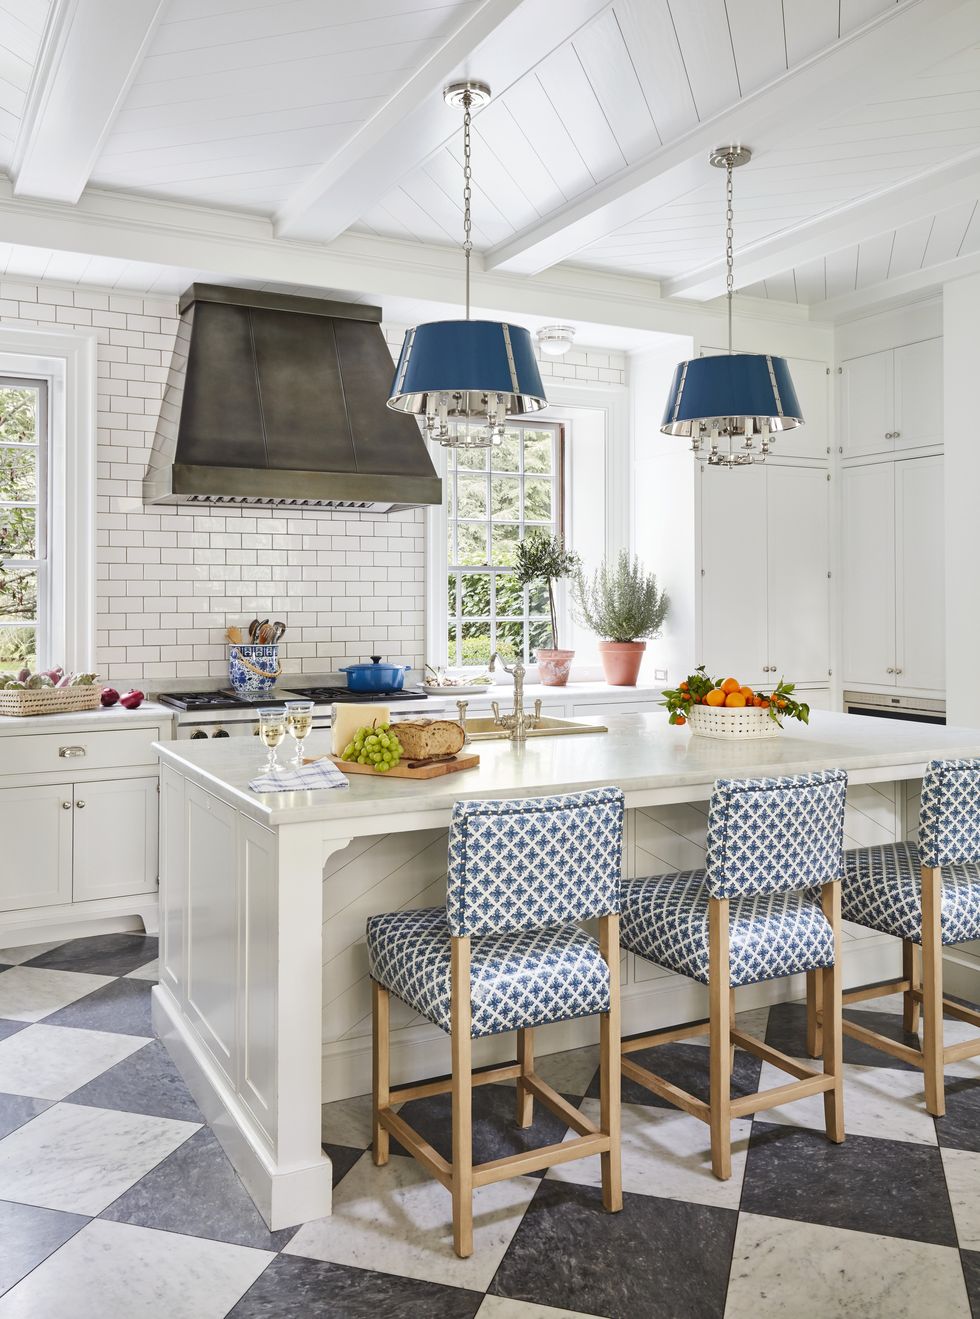 in a kitchen a duo of disarming patterns enlivens warm shades of white in counters and cabinetry and subway tile